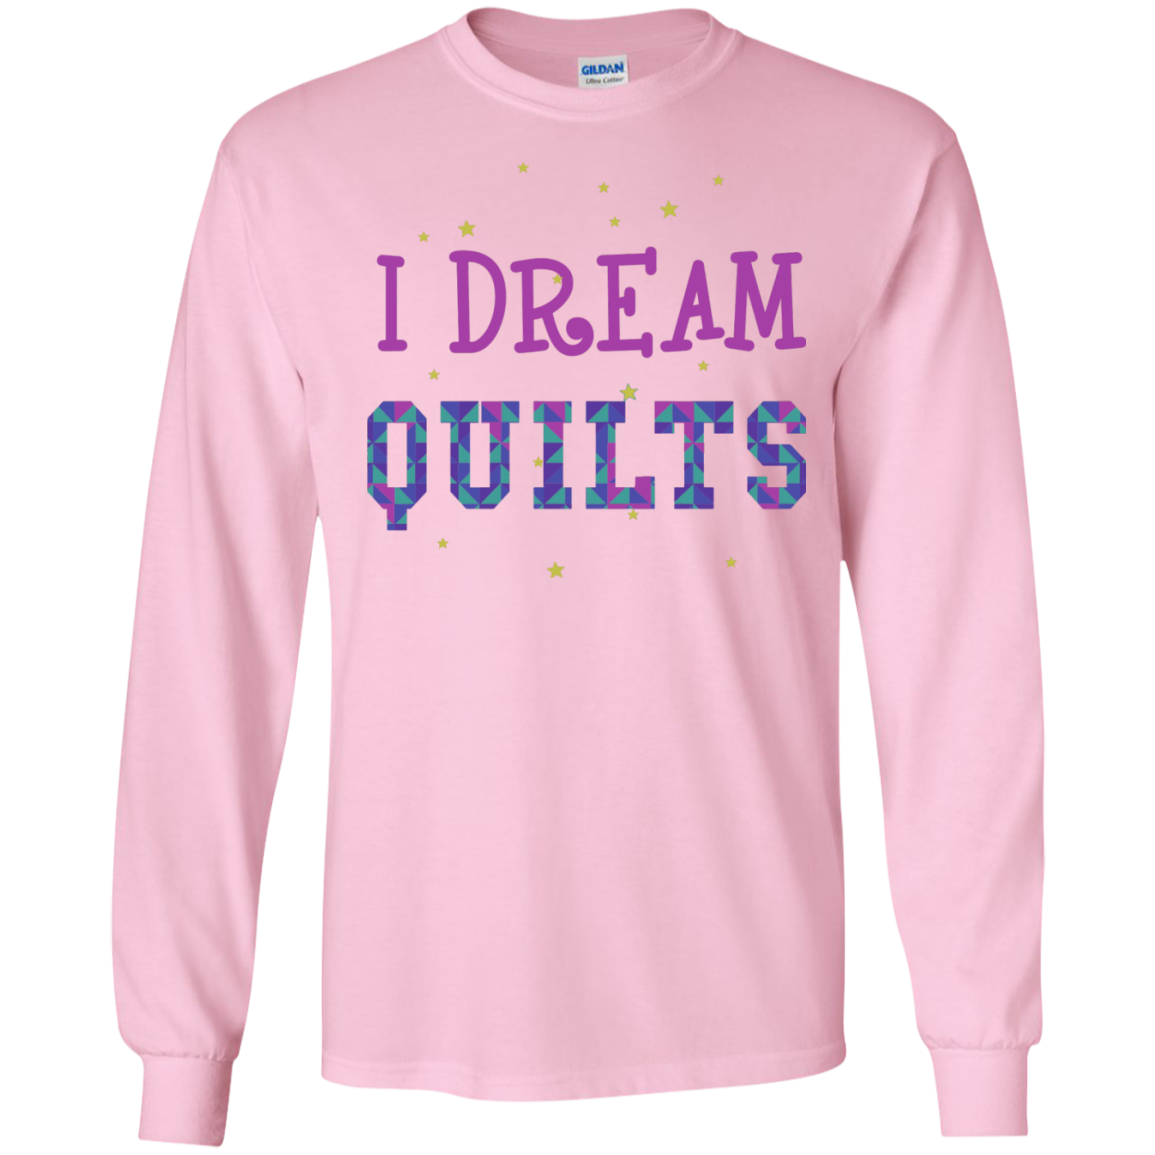 I Dream Quilts Long Sleeve Ultra Cotton T-Shirt - Crafter4Life - 9